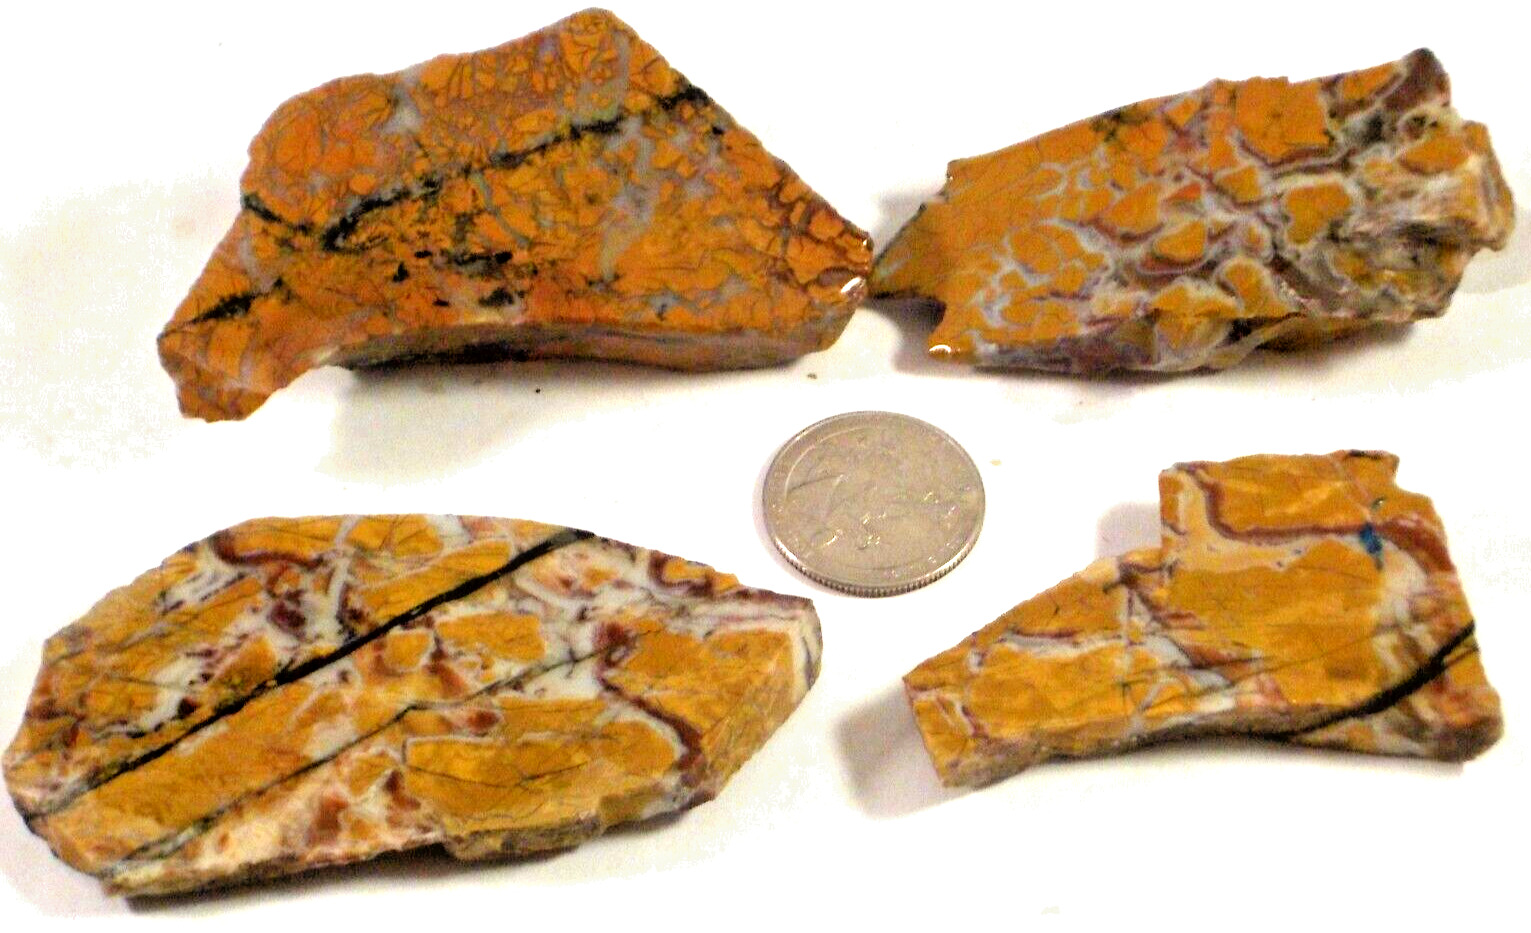 4 Rare Stone Canyon Jasper End Cuts Total 7.7 Oz  1st Picture Wet #3567